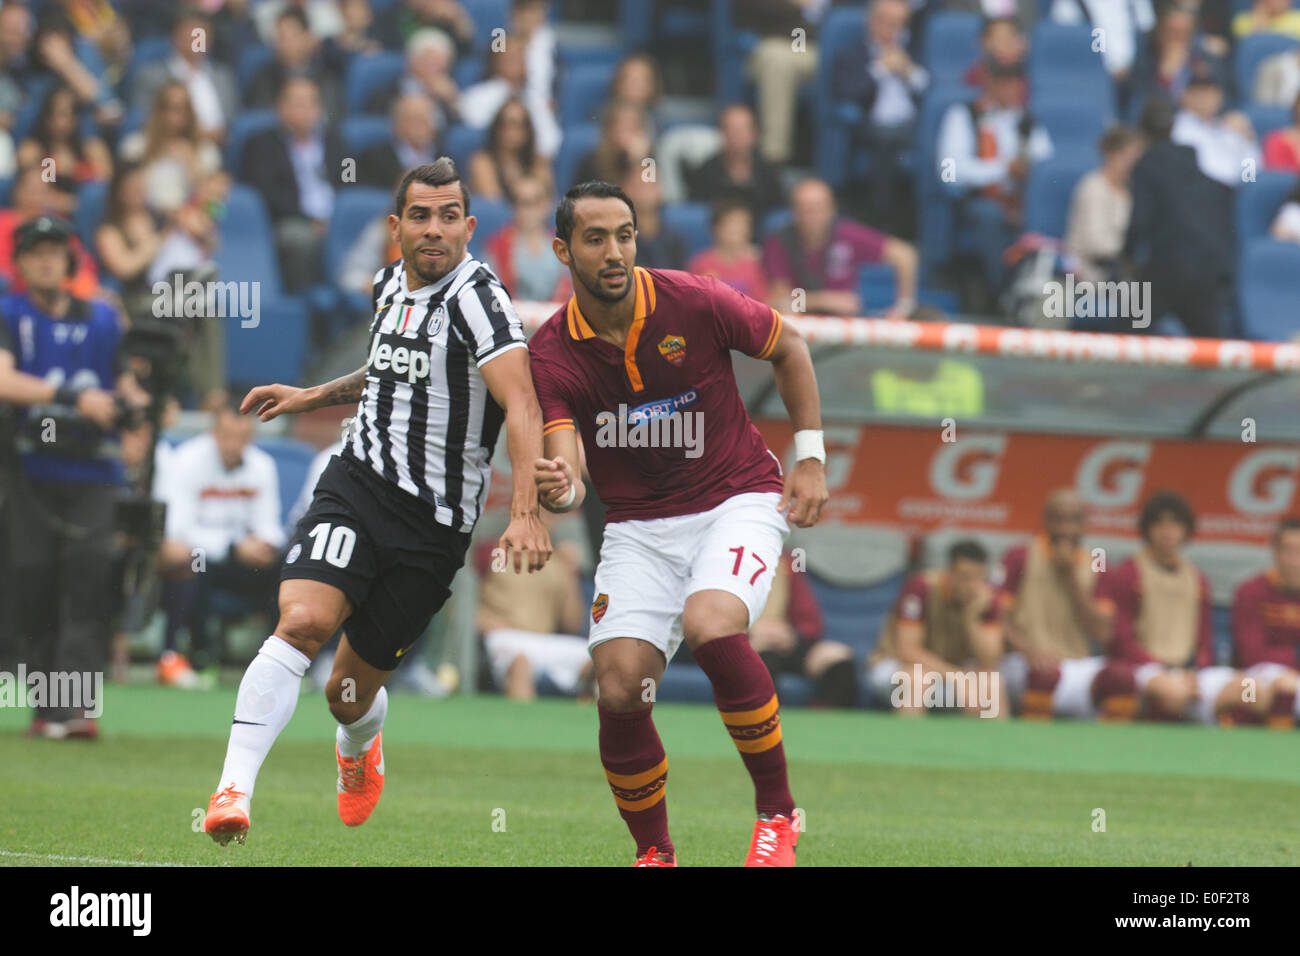 Rome, Italy. 11th May, 2014. Benatia (AS Roma - R) and Carlos Tevez (Juventus FC - L) during the Serie A match between AS Roma and FC Juventus on May 11, 2014, at Rome's Olympic Stadium. Credit:  Manuel Romano/NurPhoto/ZUMAPRESS.com/Alamy Live News Stock Photo